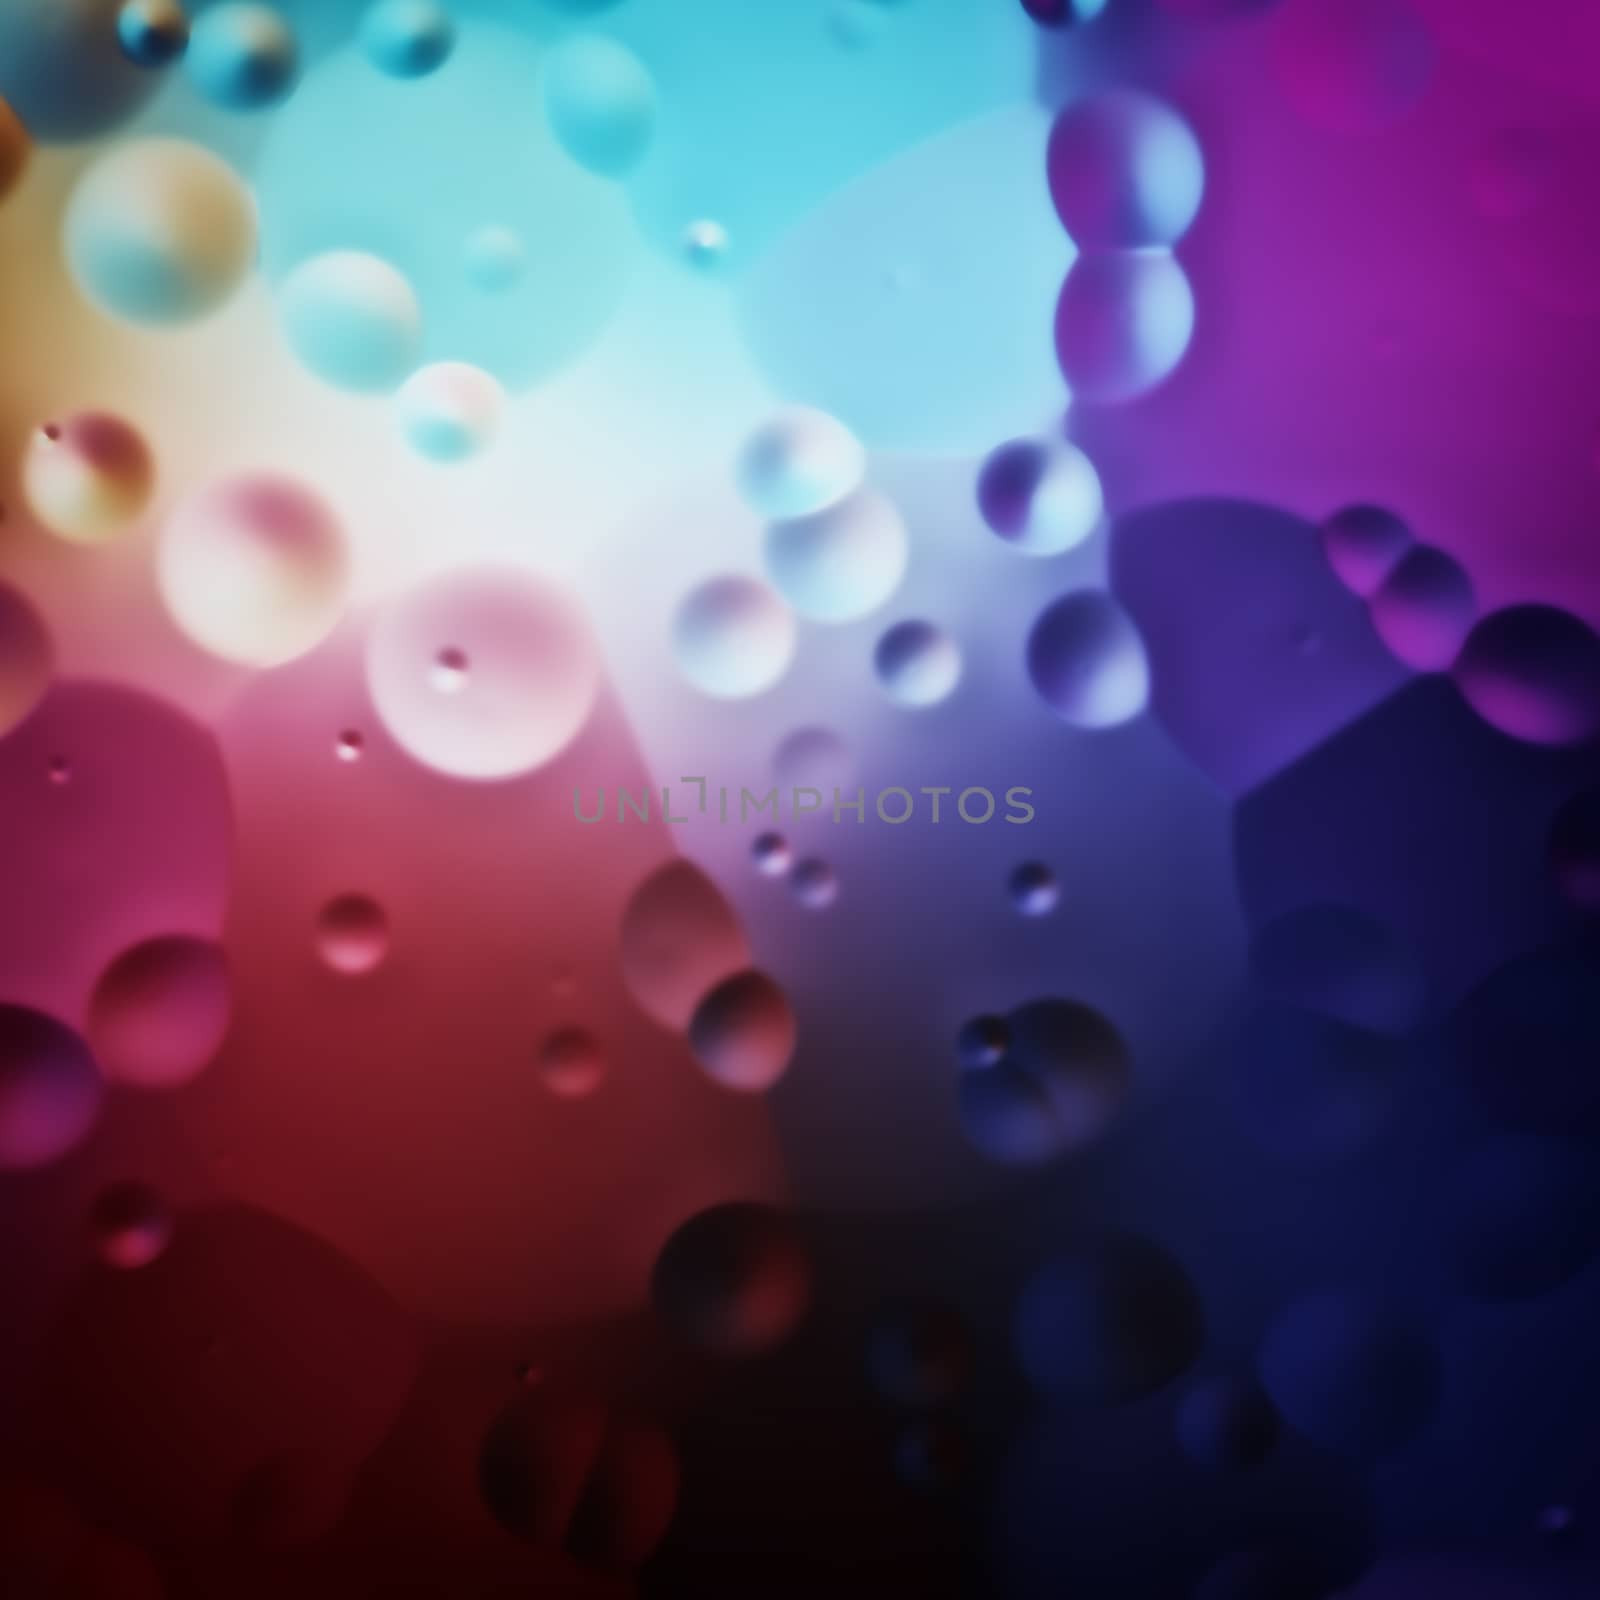 colorful oil drops background by magann